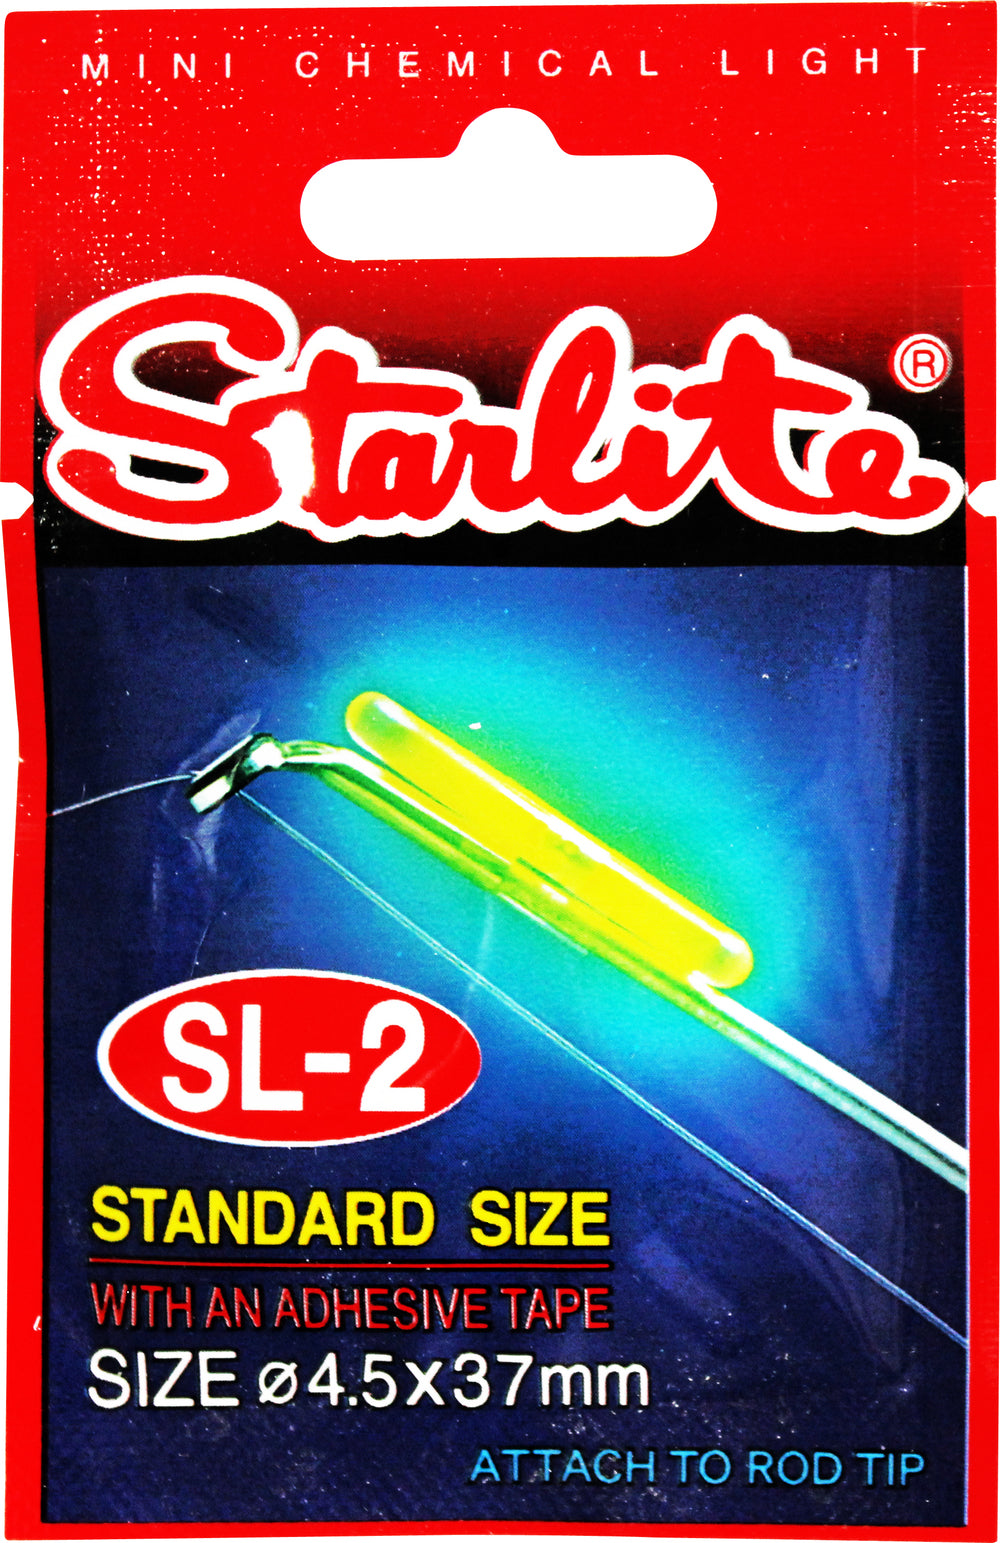 Starlight Chemical Lights - with Adhesive Tape